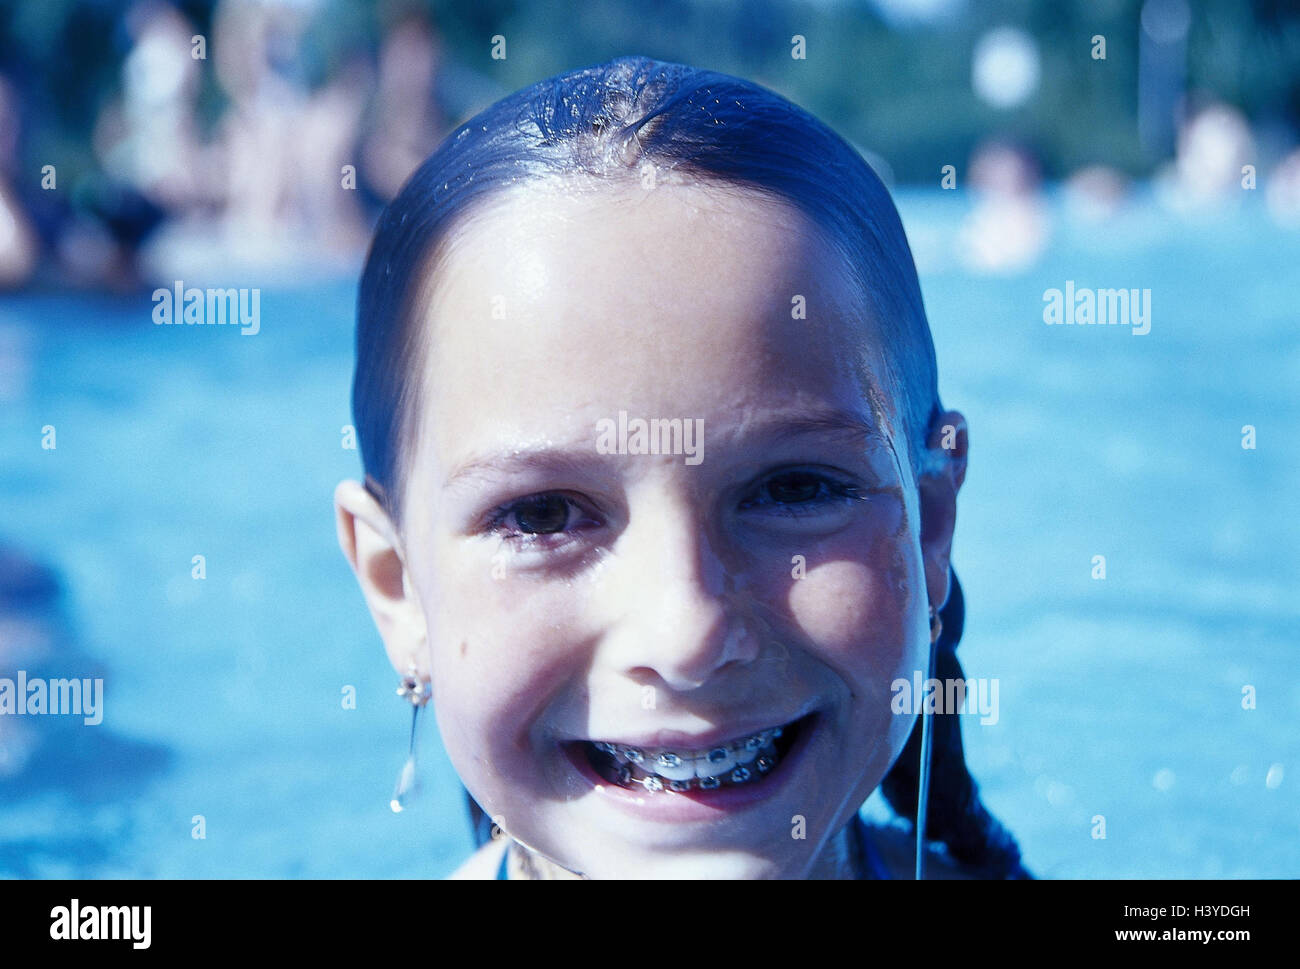 Outdoor swimming pool, girl, hairs wet, brace, laugh, portrait, child, summer, leisure time, holidays, bath pass, swimming-pool, outside cymbal, child, water, happy, cheerfully, cheerfulness, braces, orthodontic treatment, Brackets, teeth regulation, dent Stock Photo